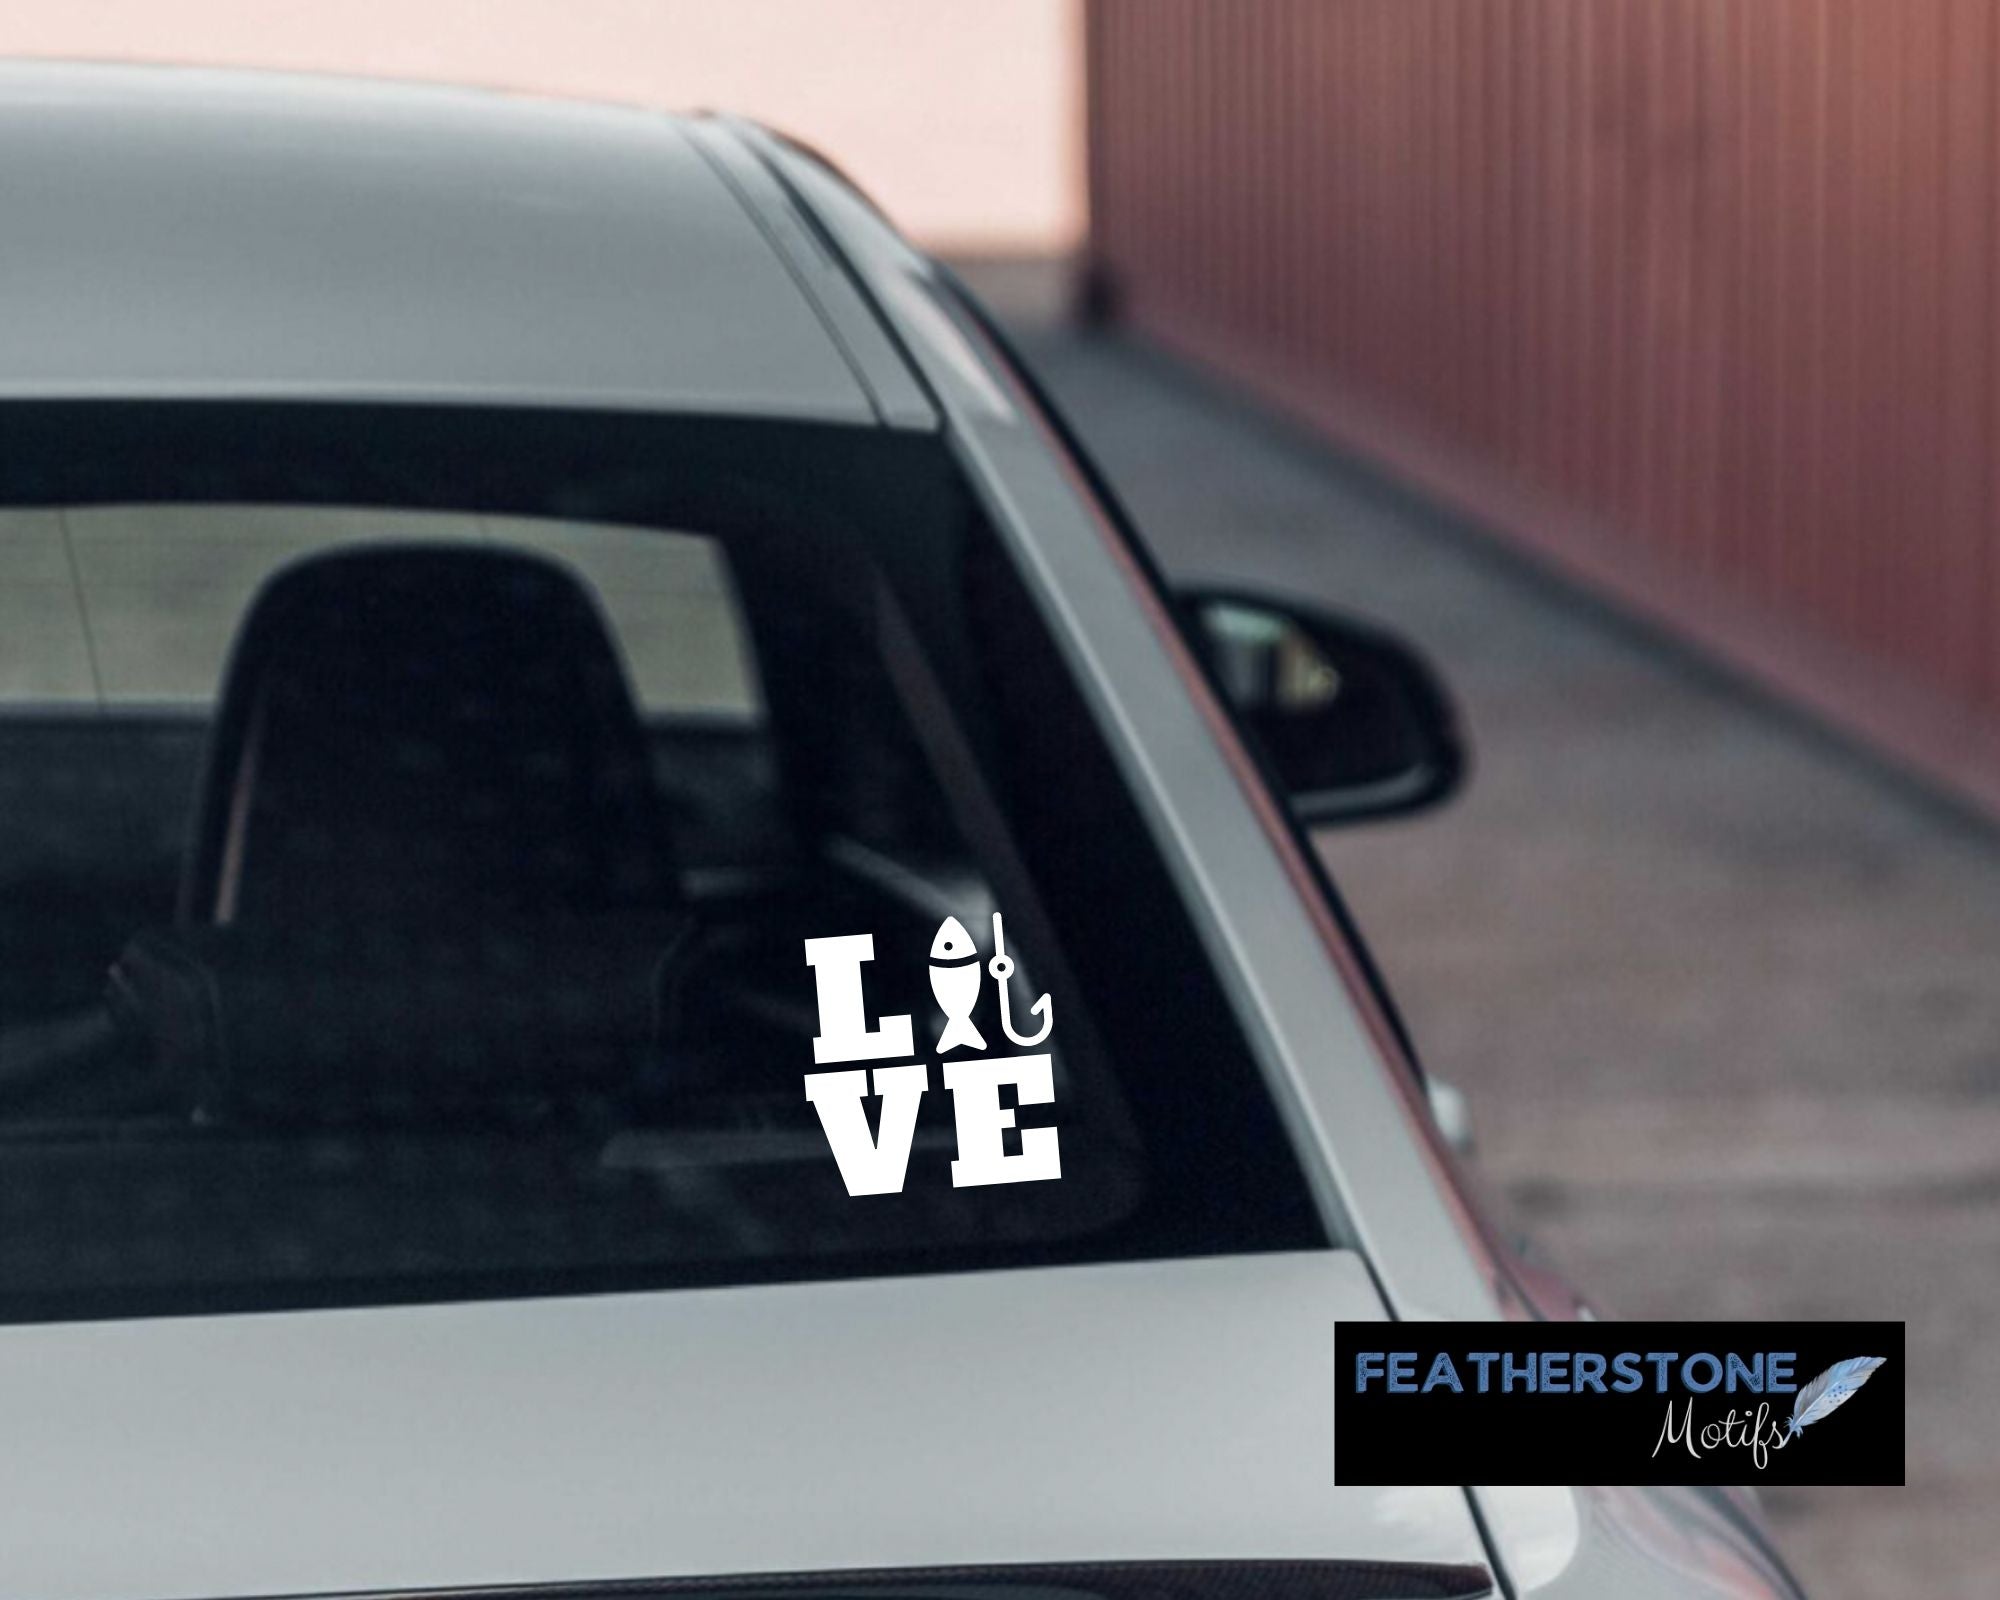 Love the fishing? Then show it with this fishing love square vinyl decal! Available in 4 sizes and 10 colors, these vinyl decals make great gifts for everyone. This image shows the Fishing Love Square vinyl decal on the back window of a car.